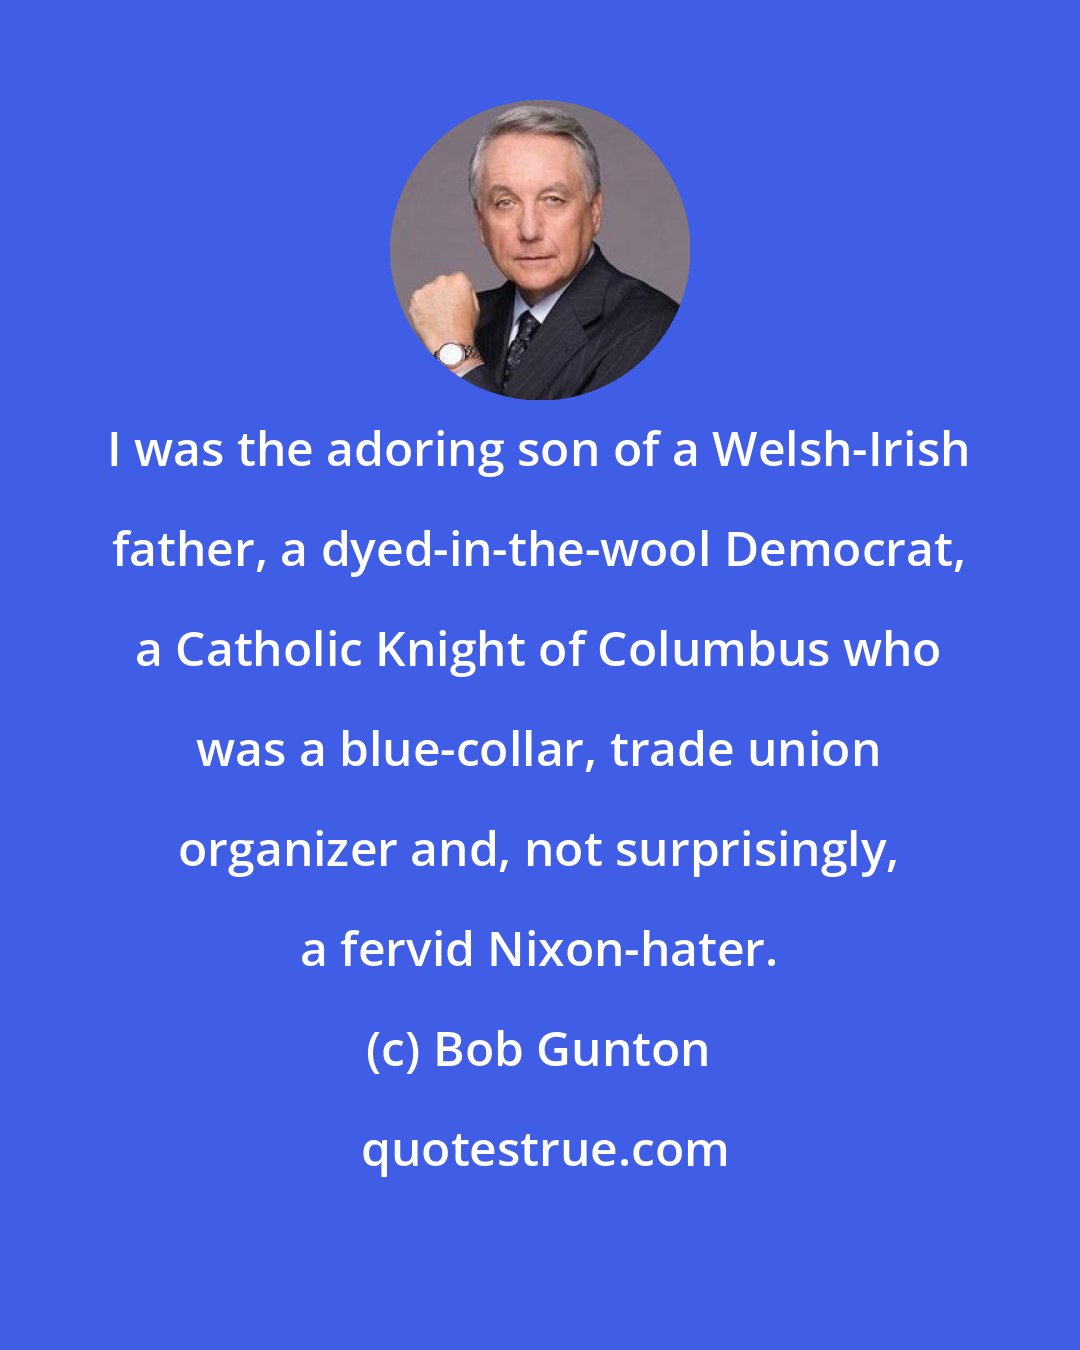 Bob Gunton: I was the adoring son of a Welsh-Irish father, a dyed-in-the-wool Democrat, a Catholic Knight of Columbus who was a blue-collar, trade union organizer and, not surprisingly, a fervid Nixon-hater.